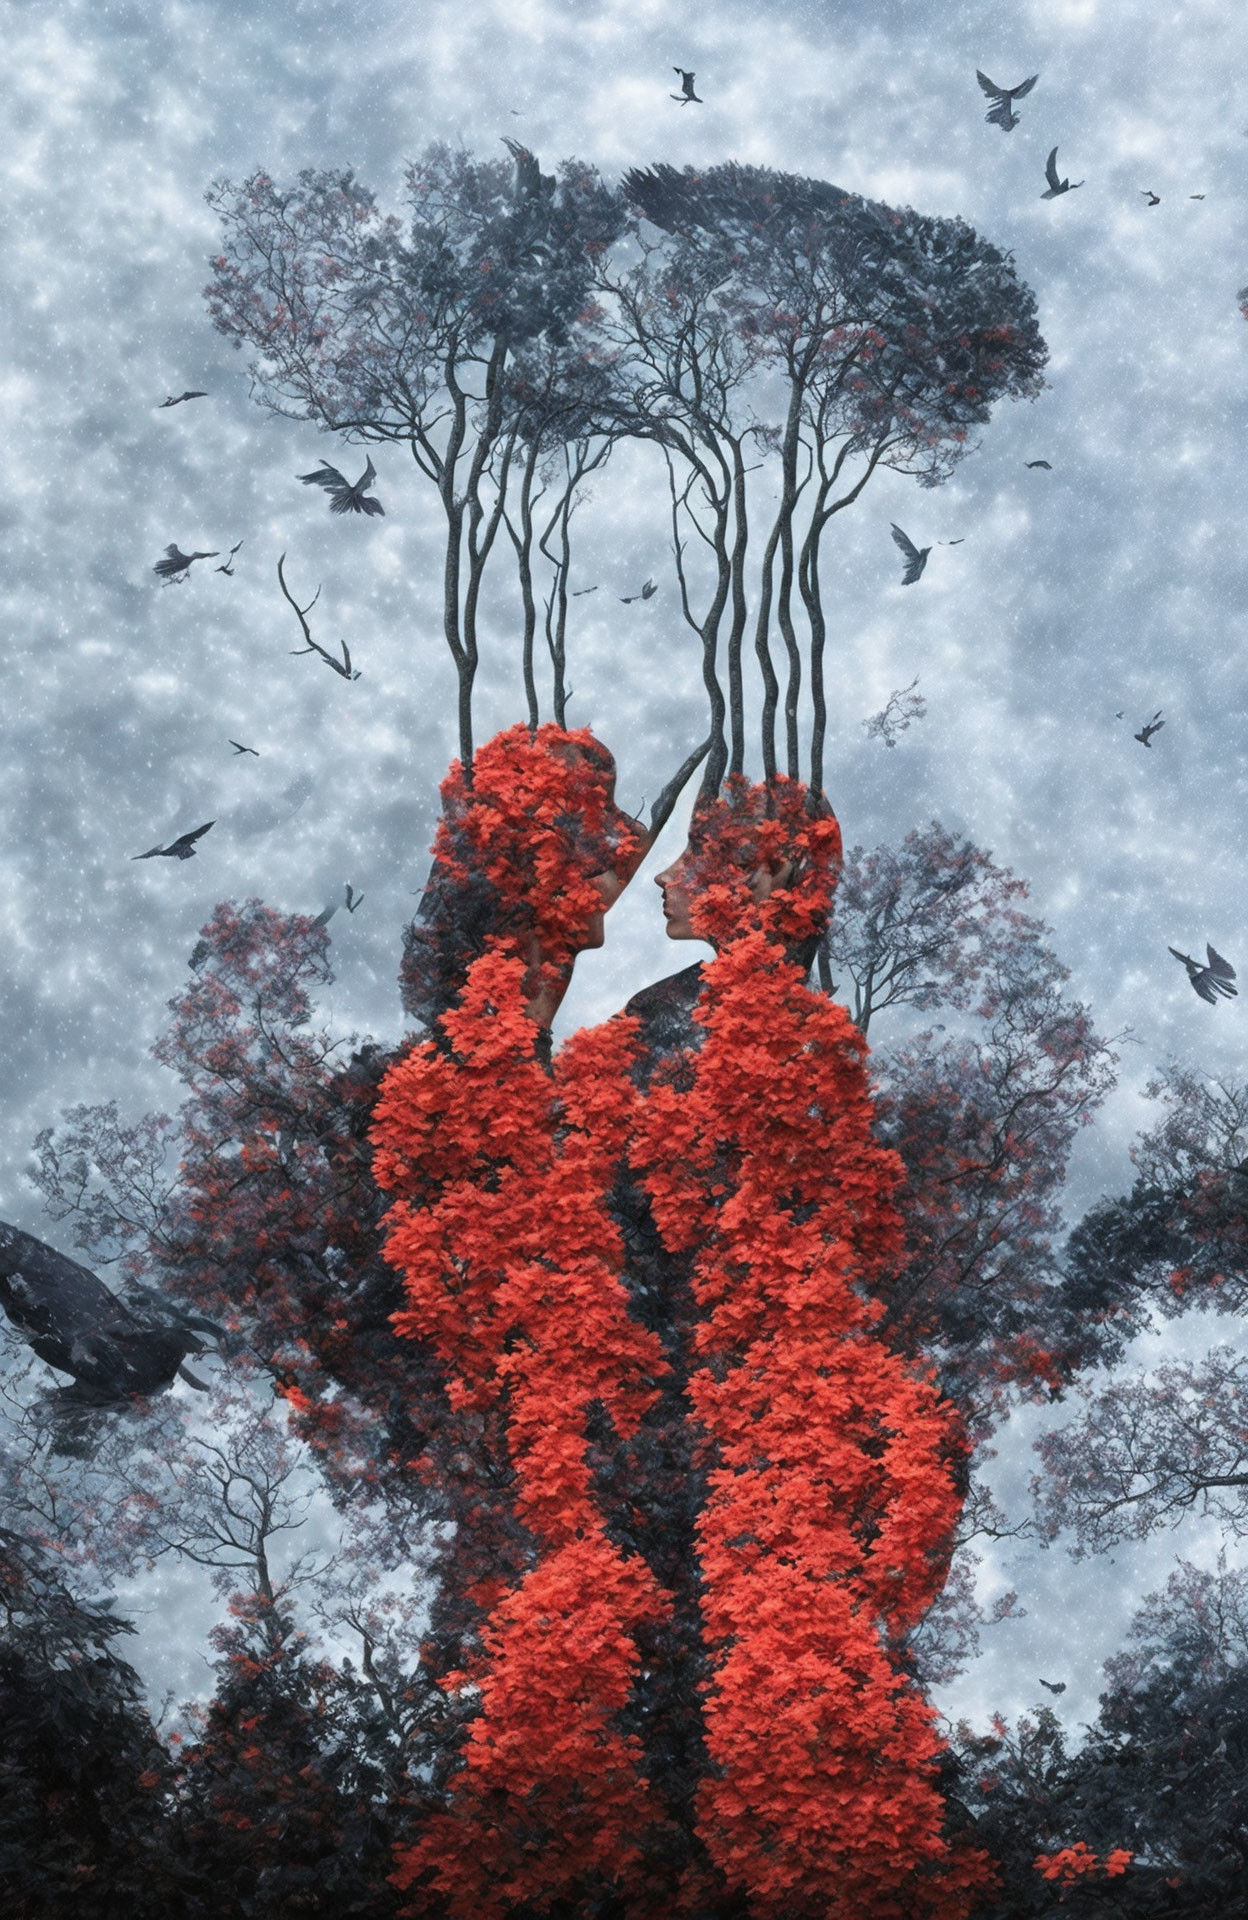 Red Leaf Silhouettes Embracing in Blue Forest with Birds